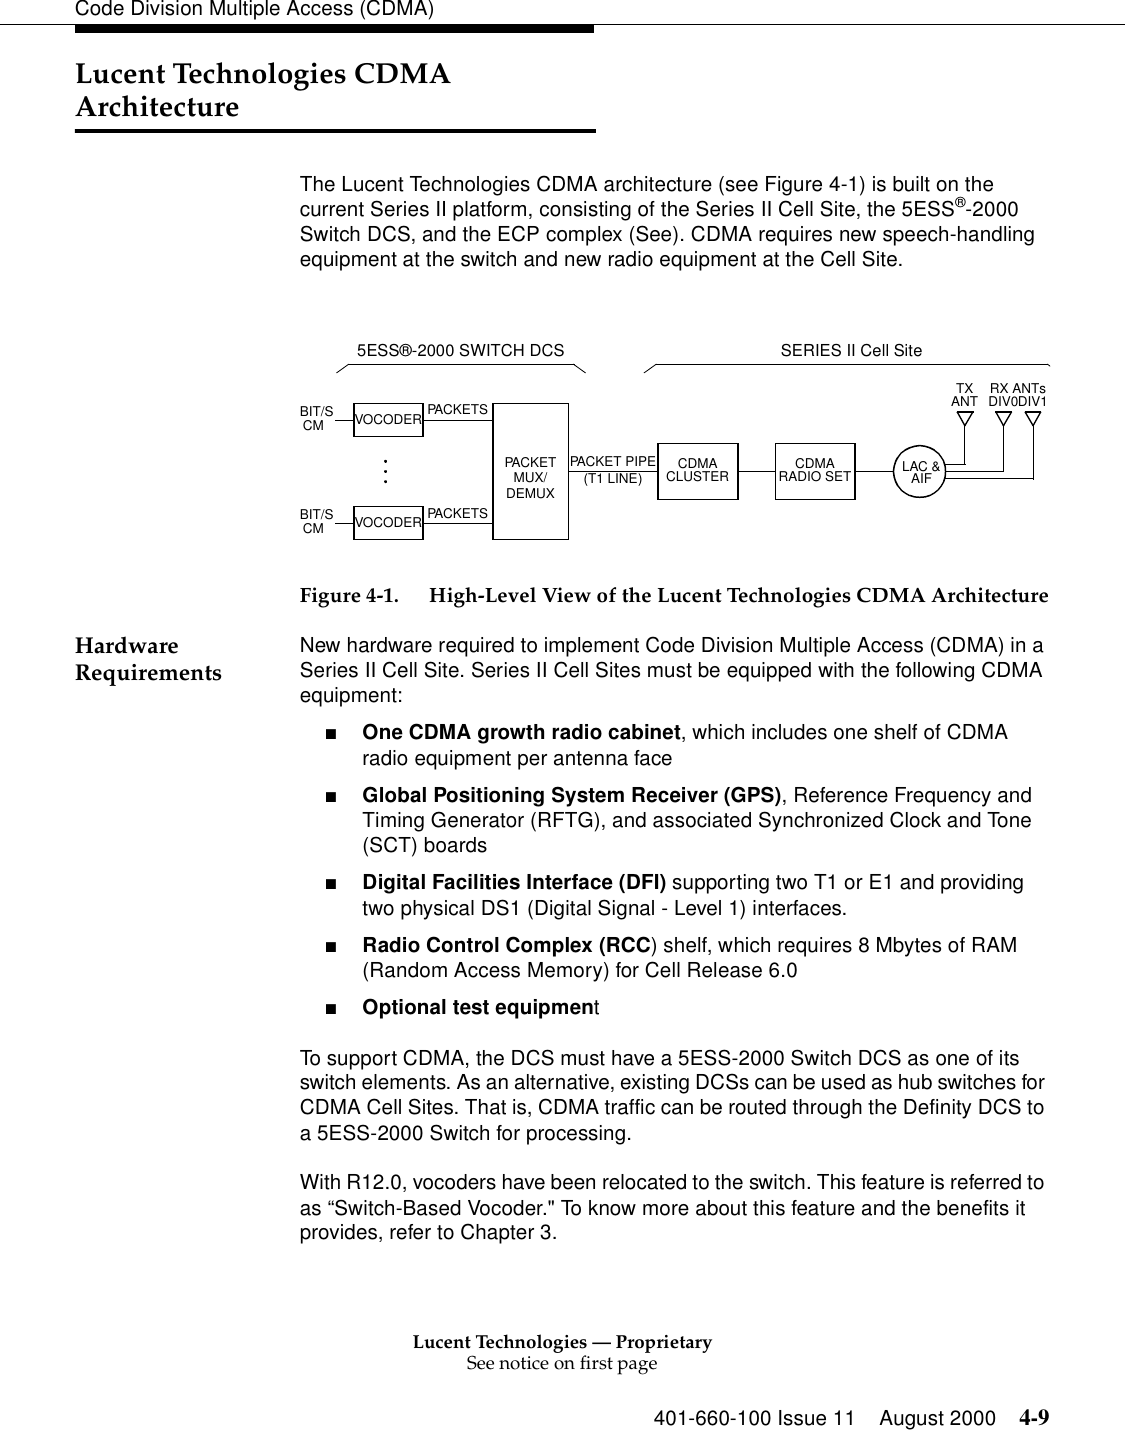 Lucent Technologies — ProprietarySee notice on first page401-660-100 Issue 11 August 2000 4-9Code Division Multiple Access (CDMA)Lucent Technologies CDMA ArchitectureThe Lucent Technologies CDMA architecture (see Figure 4-1) is built on the current Series II platform, consisting of the Series II Cell Site, the 5ESS®-2000 Switch DCS, and the ECP complex (See). CDMA requires new speech-handling equipment at the switch and new radio equipment at the Cell Site.Figure 4-1. High-Level View of the Lucent Technologies CDMA ArchitectureHardware Requirements New hardware required to implement Code Division Multiple Access (CDMA) in a Series II Cell Site. Series II Cell Sites must be equipped with the following CDMA equipment: ■One CDMA growth radio cabinet, which includes one shelf of CDMA radio equipment per antenna face ■Global Positioning System Receiver (GPS), Reference Frequency and Timing Generator (RFTG), and associated Synchronized Clock and Tone (SCT) boards ■Digital Facilities Interface (DFI) supporting two T1 or E1 and providing two physical DS1 (Digital Signal - Level 1) interfaces. ■Radio Control Complex (RCC) shelf, which requires 8 Mbytes of RAM (Random Access Memory) for Cell Release 6.0 ■Optional test equipmentTo support CDMA, the DCS must have a 5ESS-2000 Switch DCS as one of its switch elements. As an alternative, existing DCSs can be used as hub switches for CDMA Cell Sites. That is, CDMA traffic can be routed through the Definity DCS to a 5ESS-2000 Switch for processing.With R12.0, vocoders have been relocated to the switch. This feature is referred to as “Switch-Based Vocoder.&quot; To know more about this feature and the benefits it provides, refer to Chapter 3. BIT/SCM PACKETSPACKET PIPEBIT/SCMSERIES II Cell Site5ESS®-2000 SWITCH DCSTXANT RX ANTsDIV0DIV1PACKETS(T1 LINE) CDMARADIO SETCDMACLUSTERPACKETMUX/VOCODERVOCODERLAC &amp;AIFDEMUX